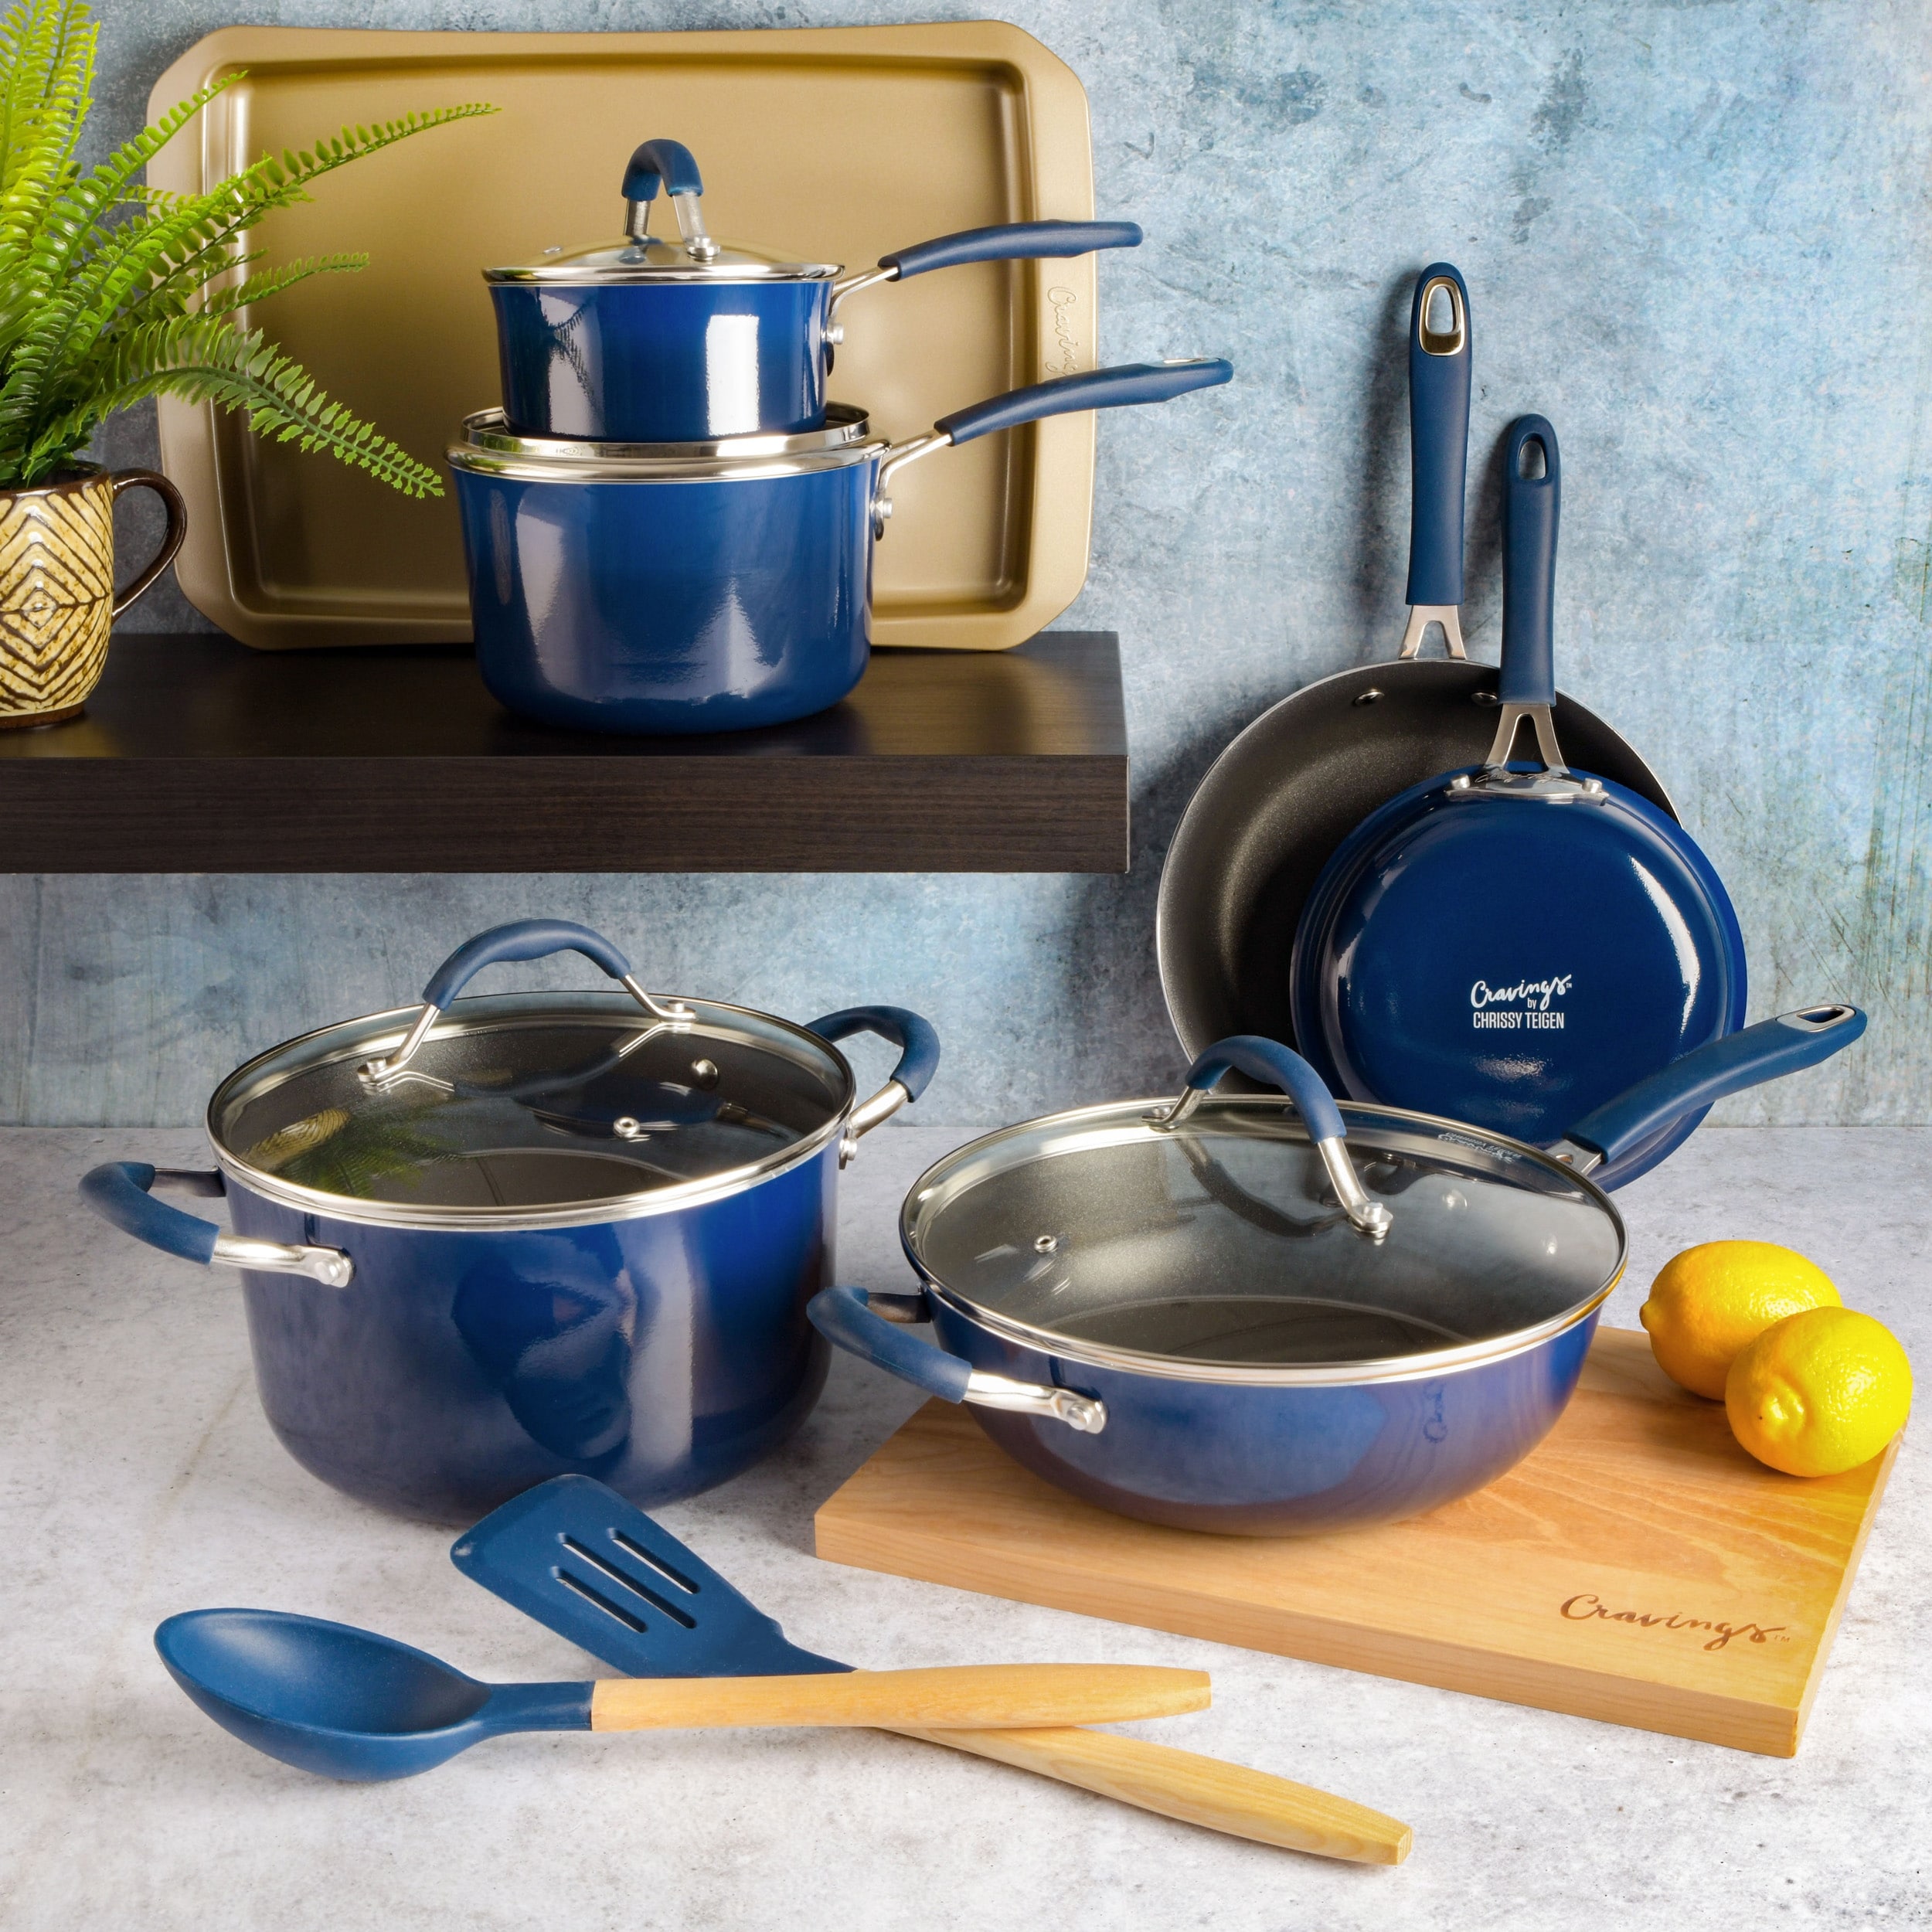 https://ak1.ostkcdn.com/images/products/is/images/direct/e94926f4aca024a6d2be19ad1b90880fddb8e548/Cravings-by-Chrissy-Teigen-14Pc-Aluminum-Cookware-Combo-Set-in-Blue.jpg